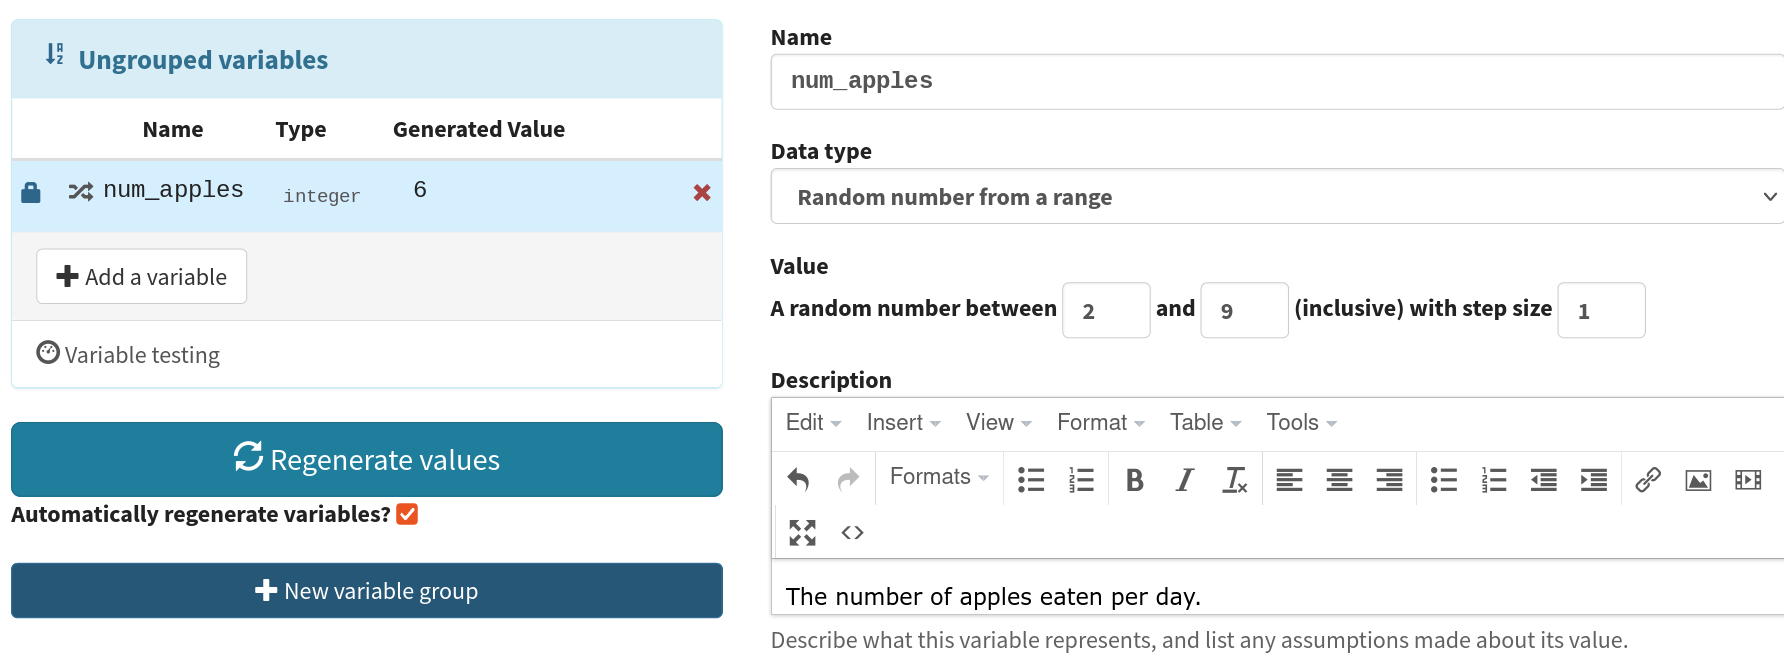 Screenshot of the variable editor. The name field contains "num_apples", the value reads "a random number between 2 and 9 (inclusive) with step size 1", and the description reads "The number of apples eaten per day.